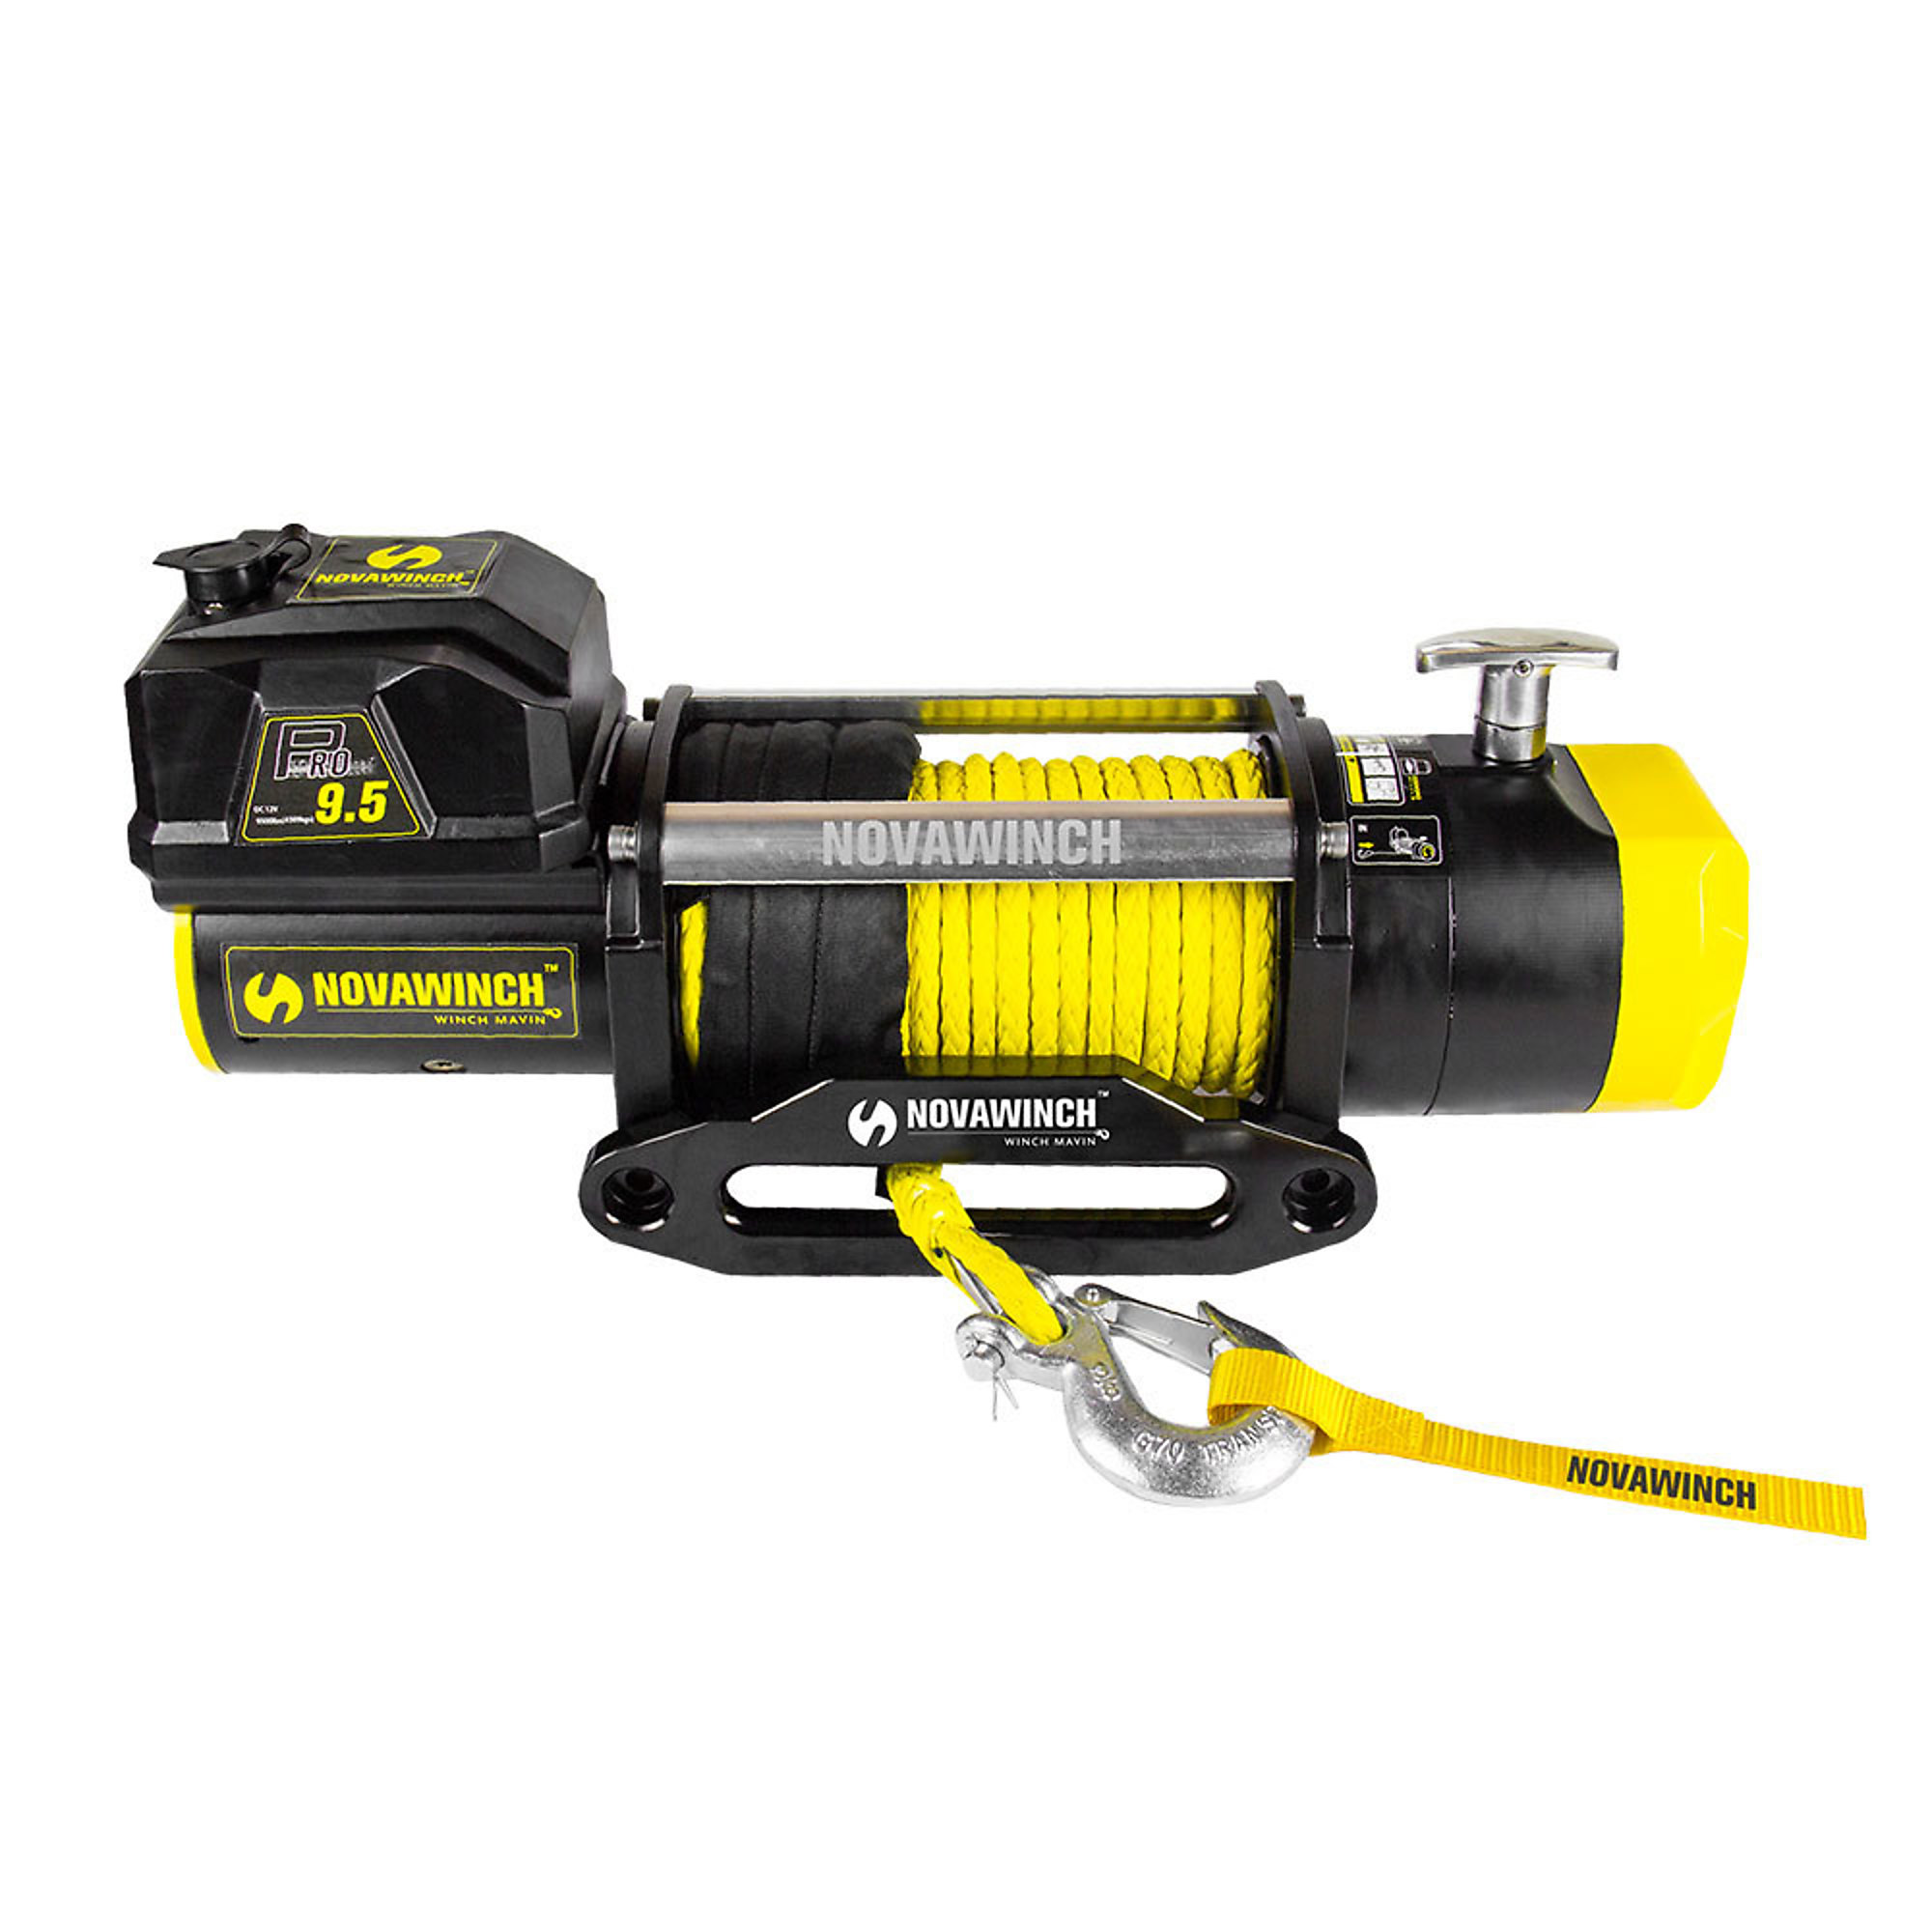 Novawinch, Truck/Trailer 12V DC Powered Winch, Capacity (Line Pull) 9500 lb, Volts 12, Max. Amps 360, Model 701001068582